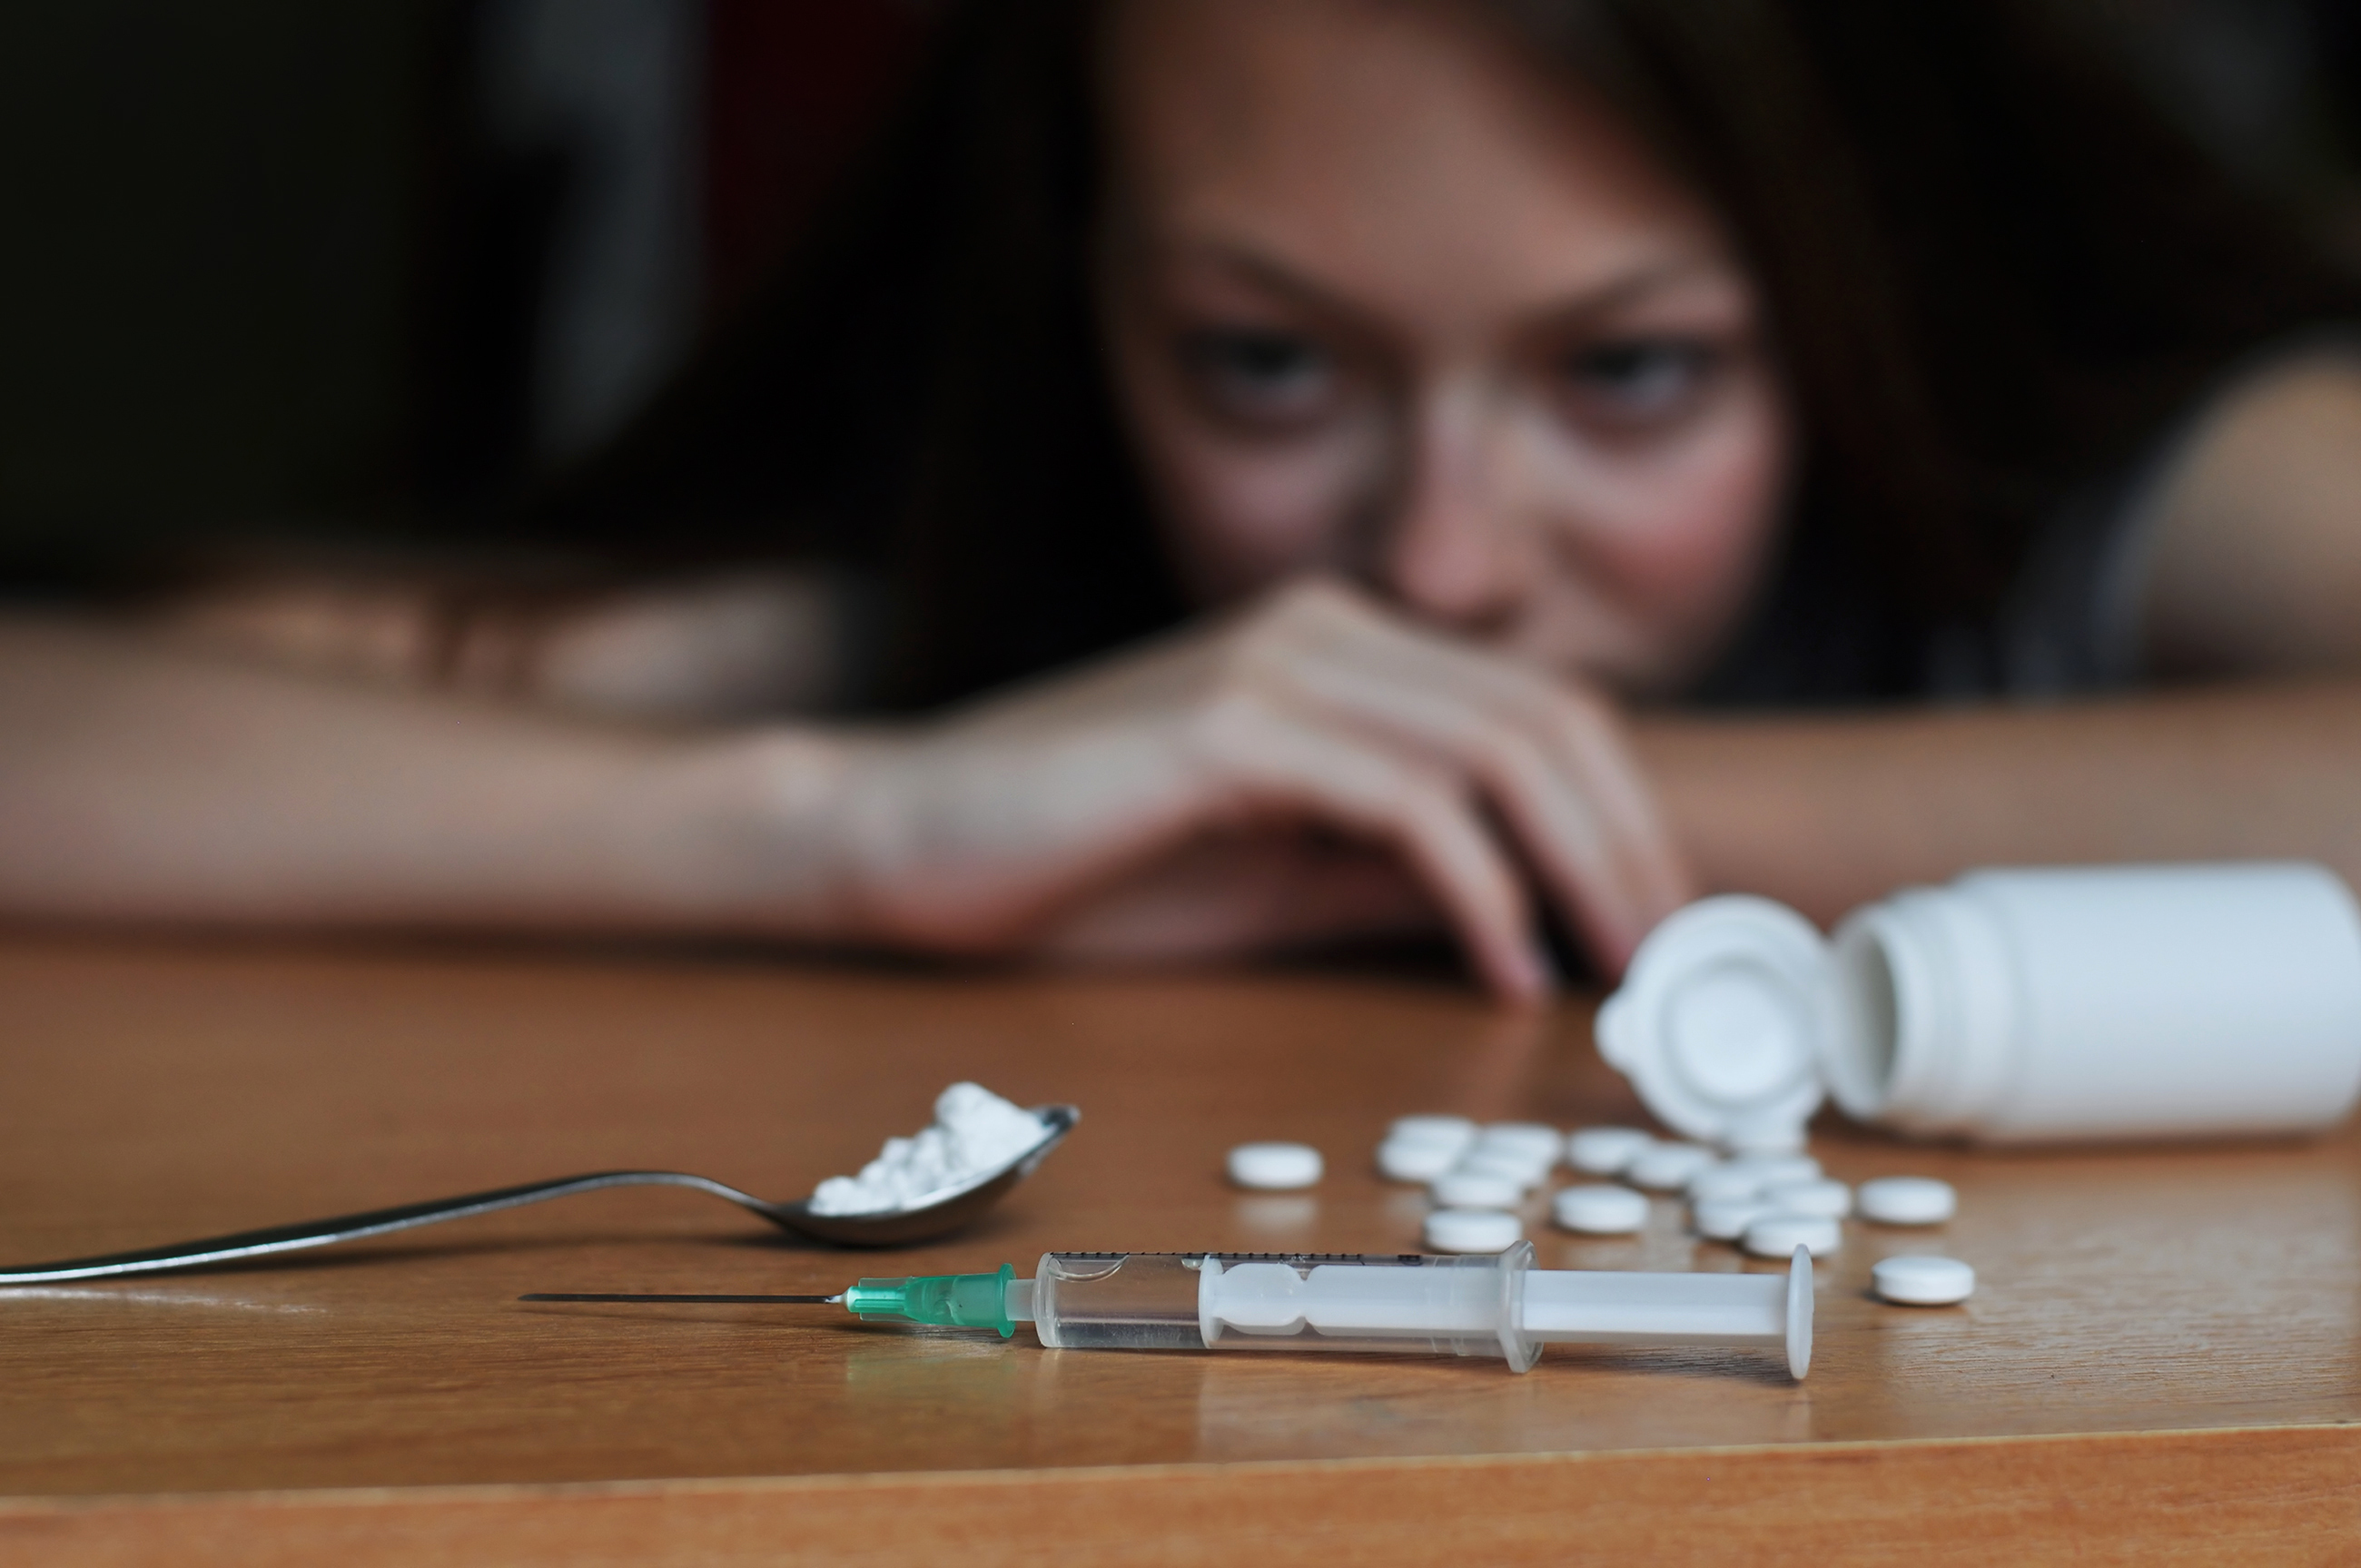 Substance abuse in teen